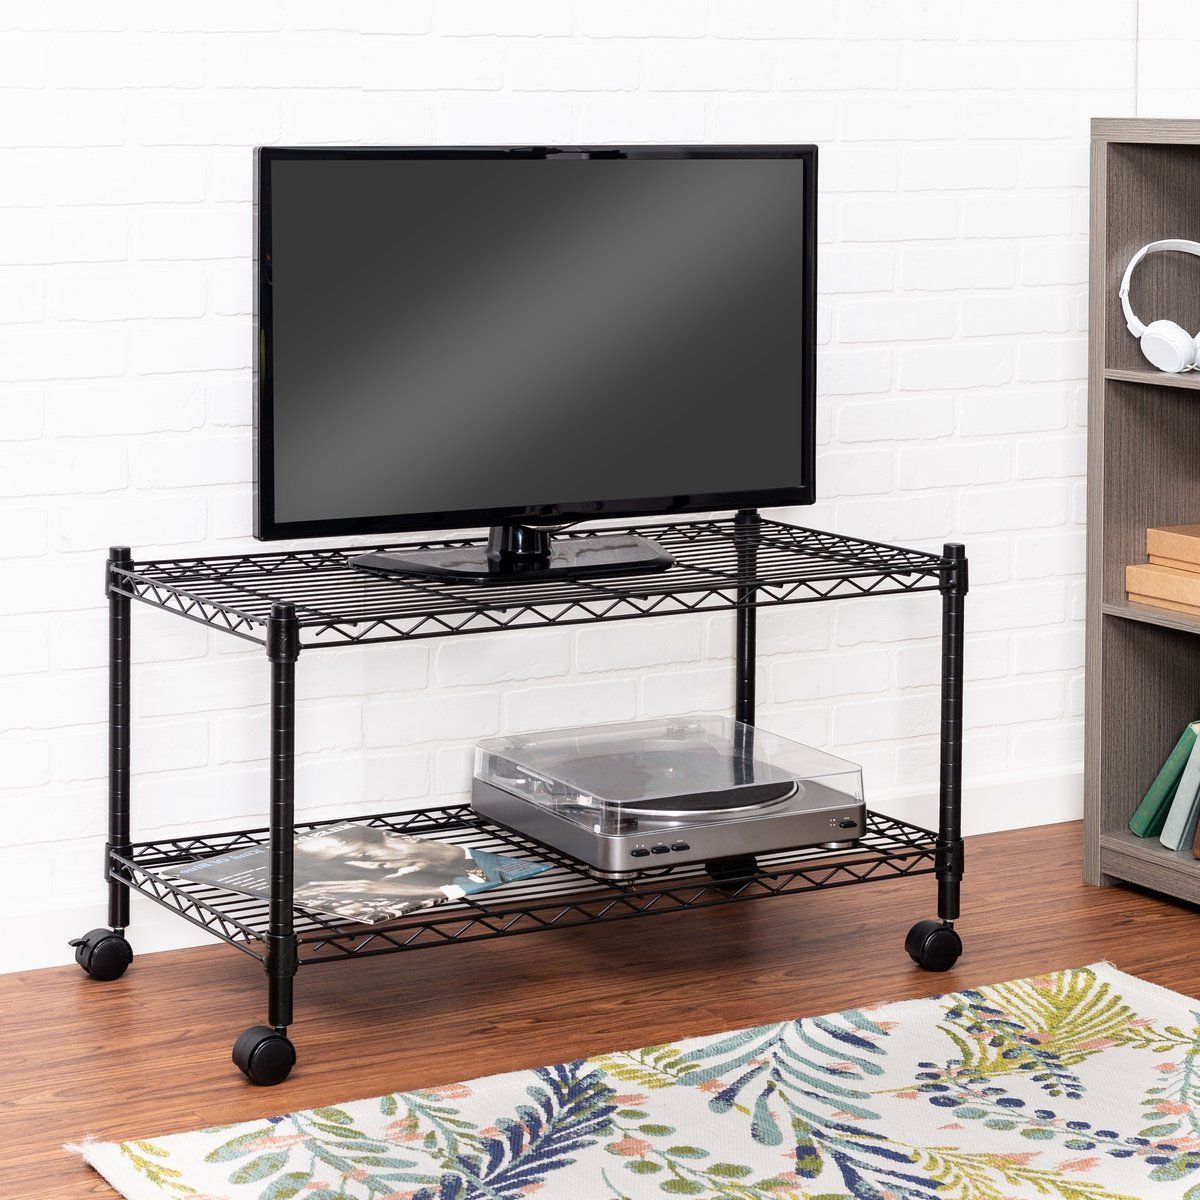 2 Tier Tv Stand And Media Cart, Black (View 5 of 10)